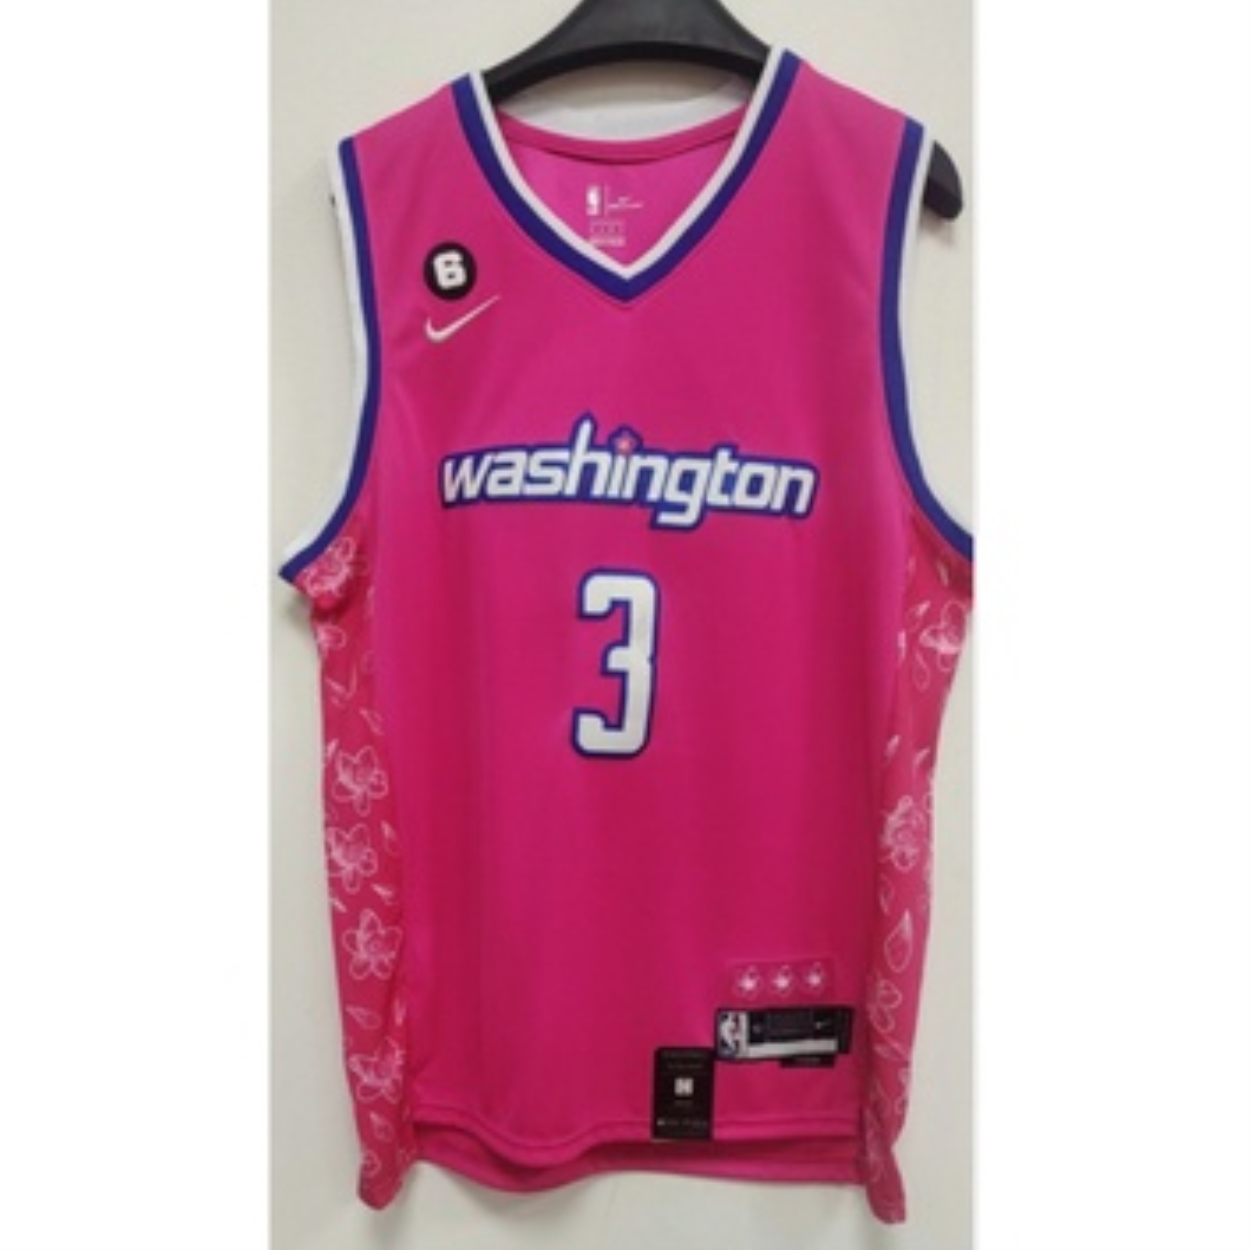 Only ₱375.00 - 487.50 for 52 HG JERSEY CONCEPT WASHINGTON PINK